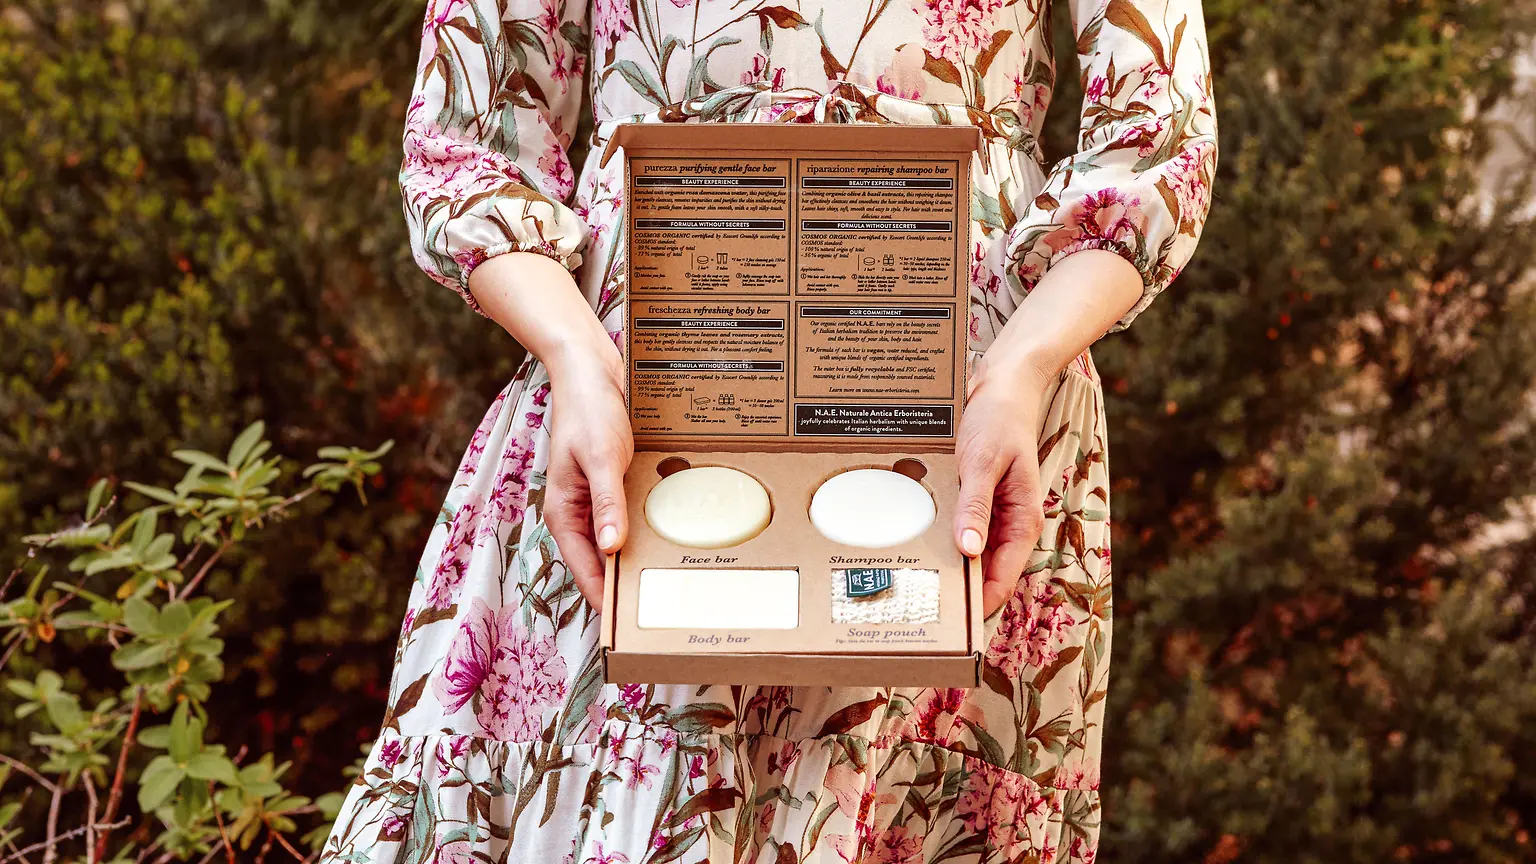 In cooperation with Amazon the organic-certified beauty brand N.A.E. has taken further steps towards sustainability with the launch of its new plastic-free product packaging.